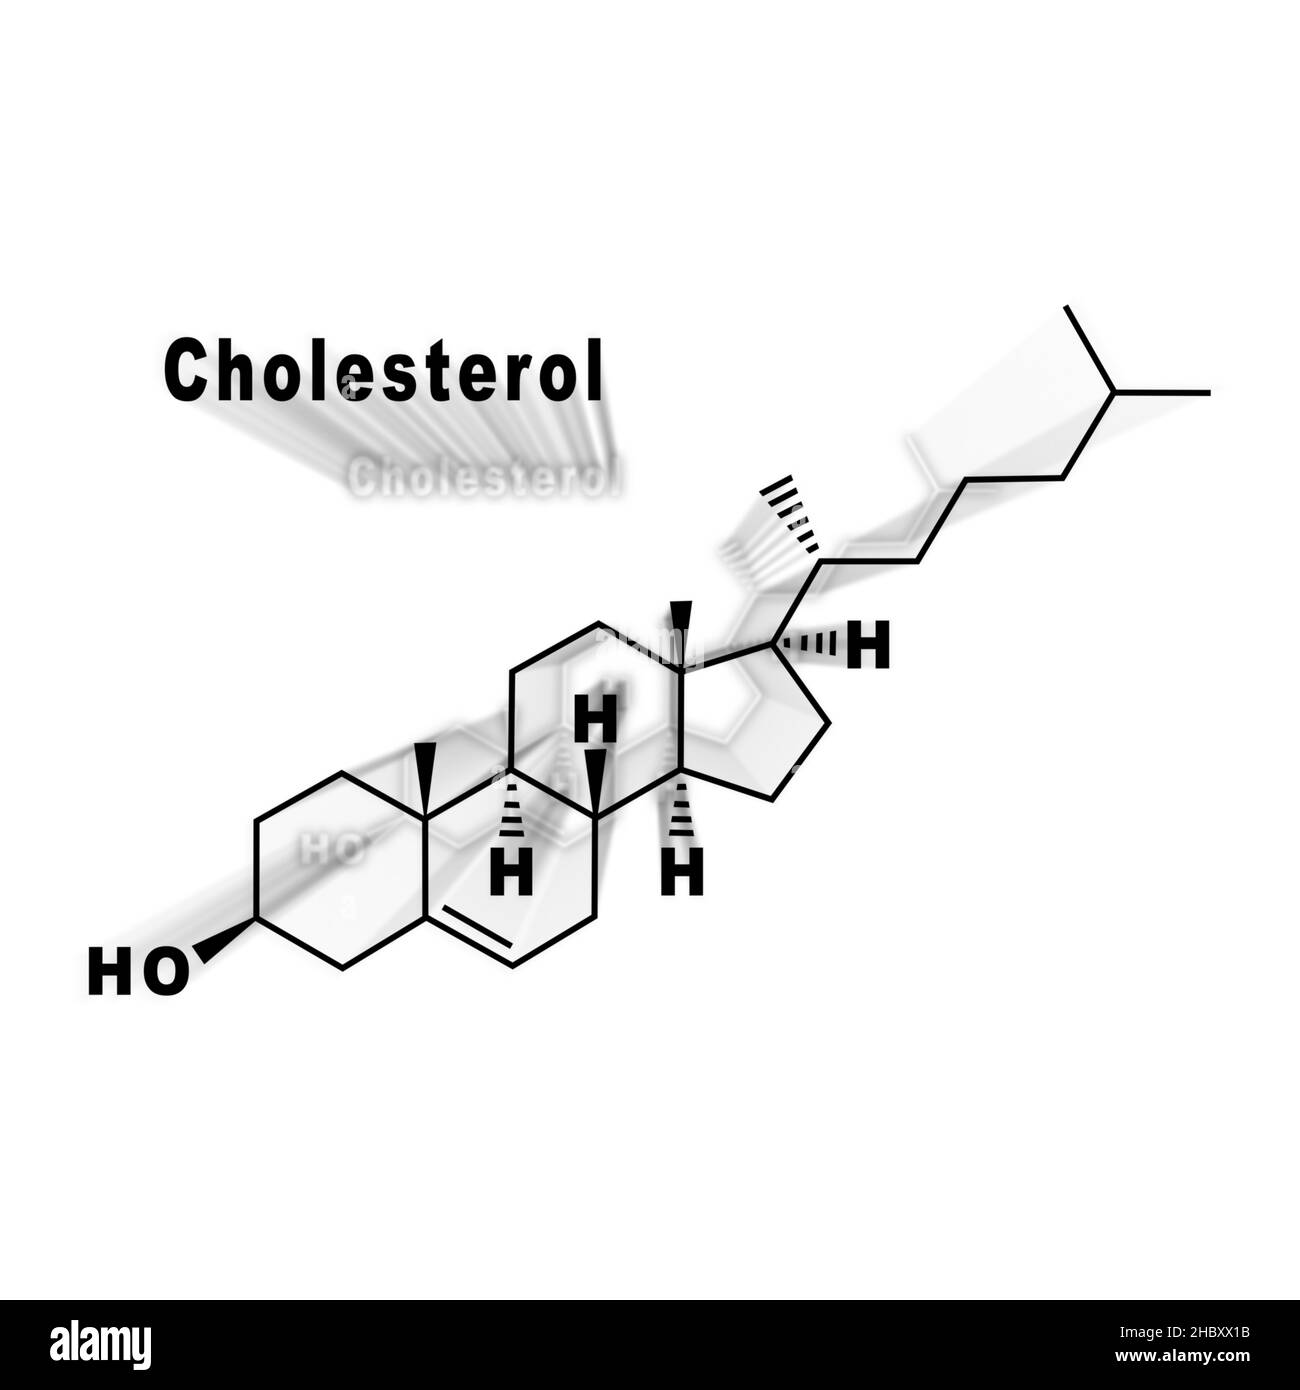 Cholesterol Hormone Structural chemical formula on a white background Stock Photo